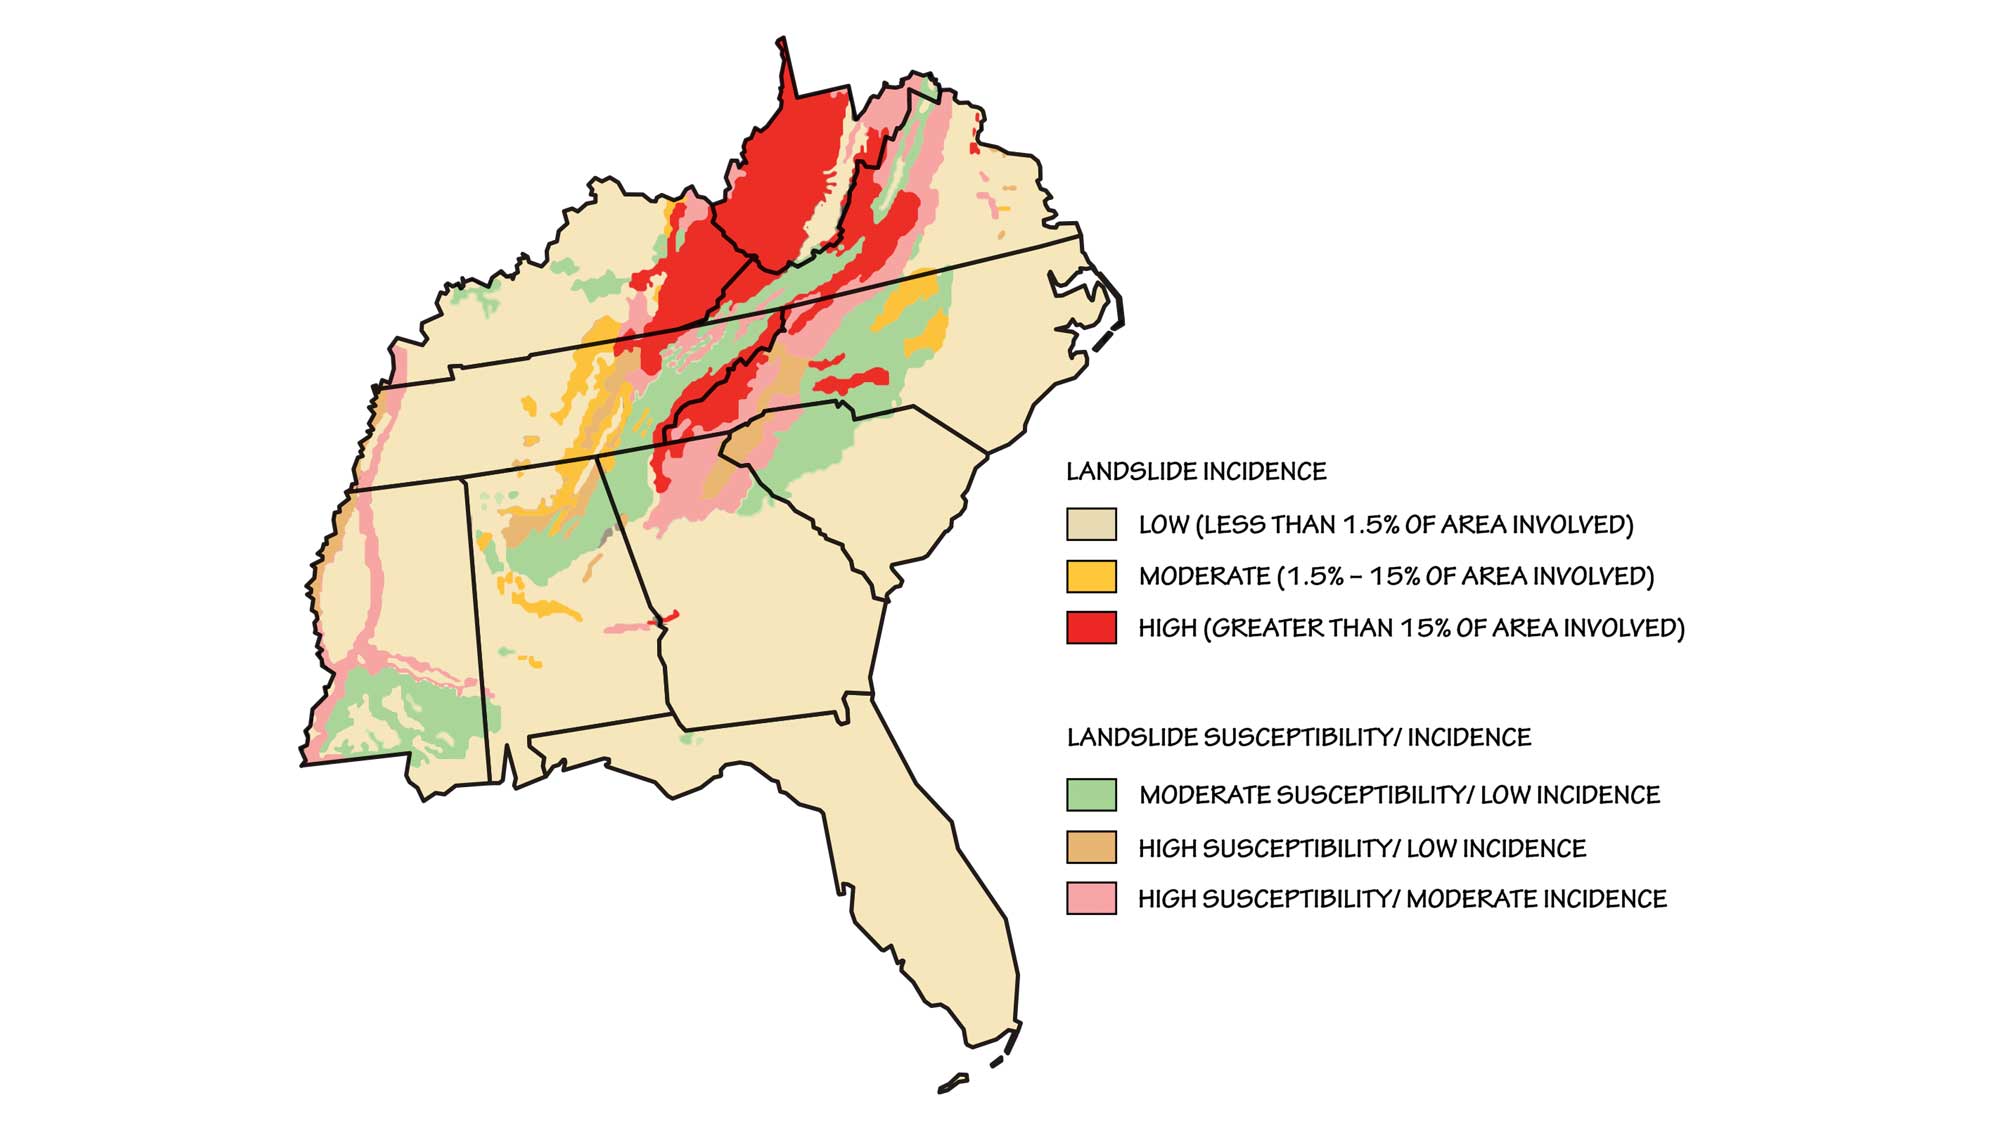 Map showing landslide incidence and risk in the southeastern United States.